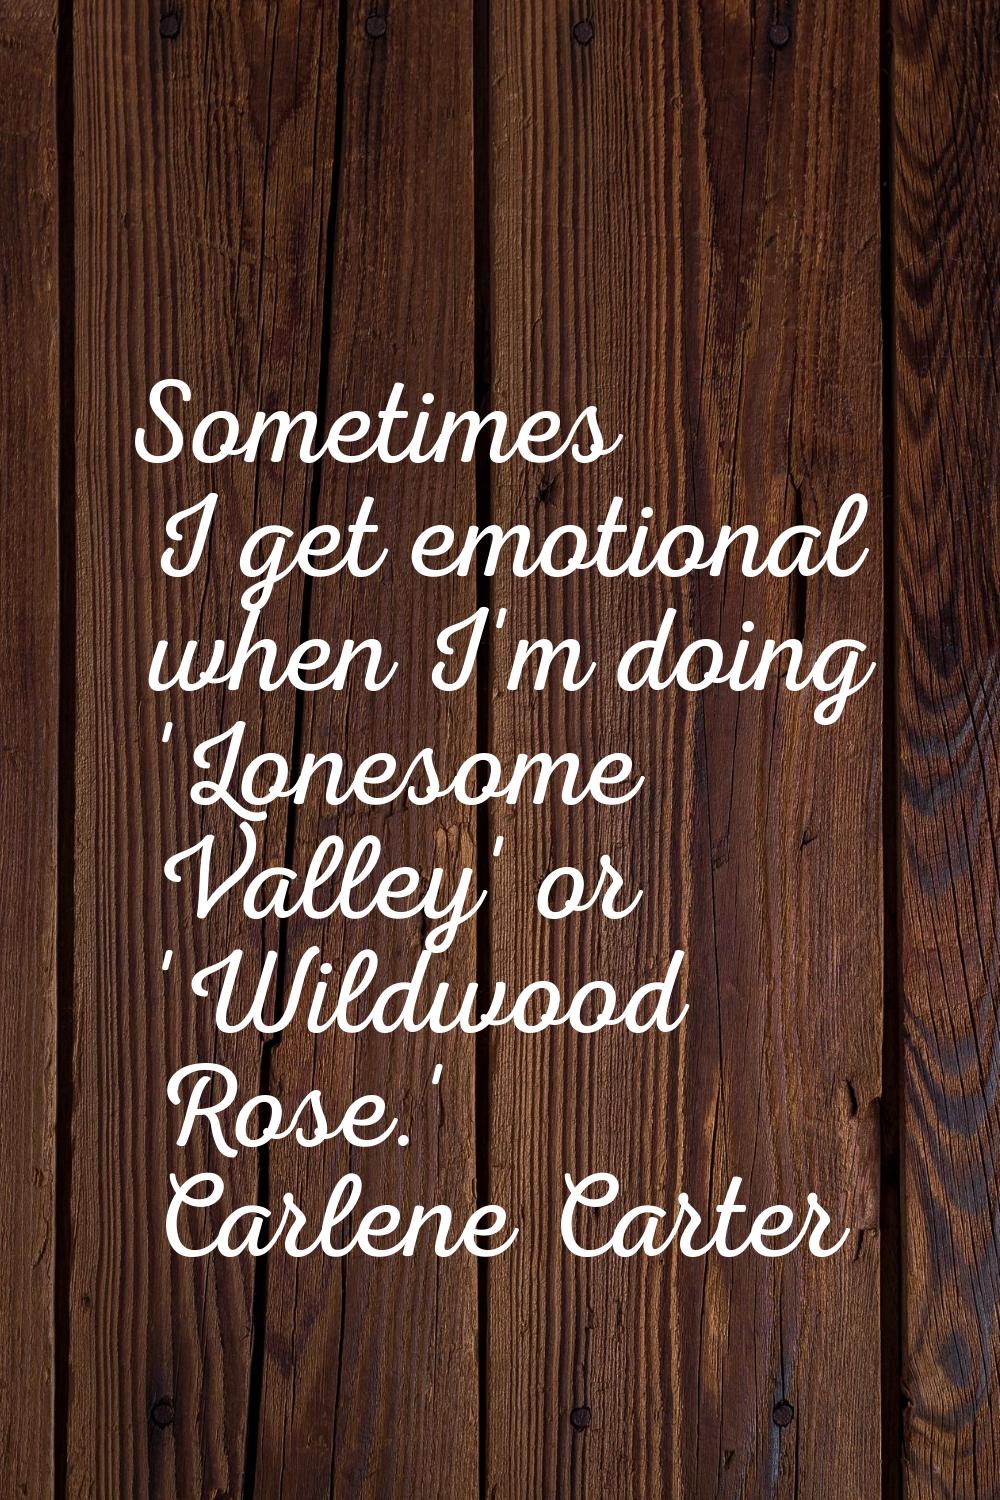 Sometimes I get emotional when I'm doing 'Lonesome Valley' or 'Wildwood Rose.'